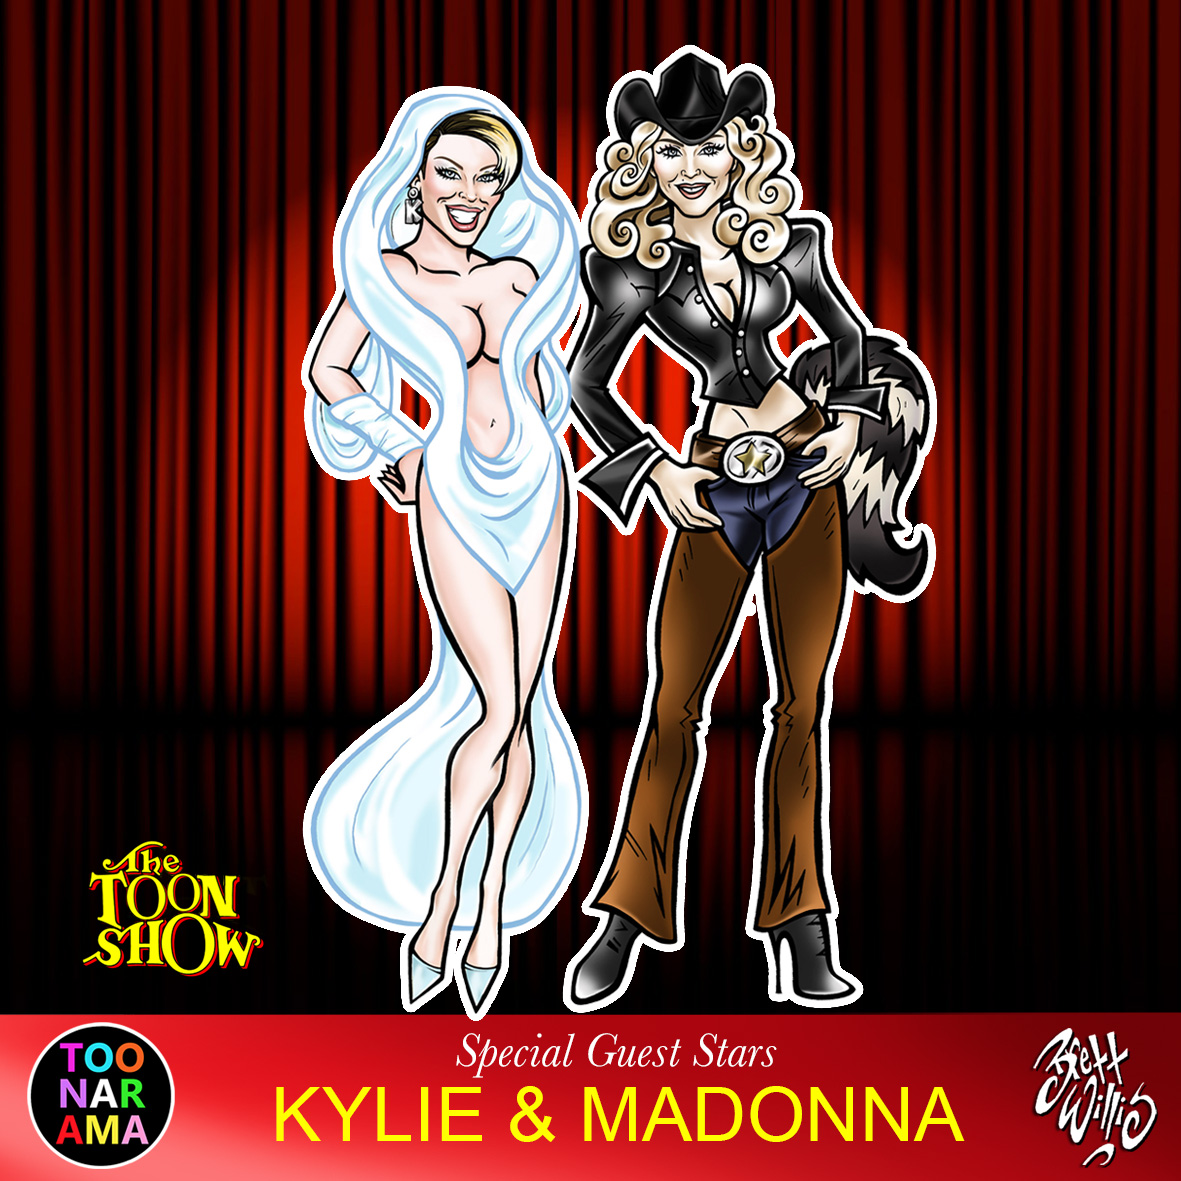 The TOON Show Special Guest Stars KYLIE & MADONNA #mighty #music #KylieMinogue #madonna #toonarama